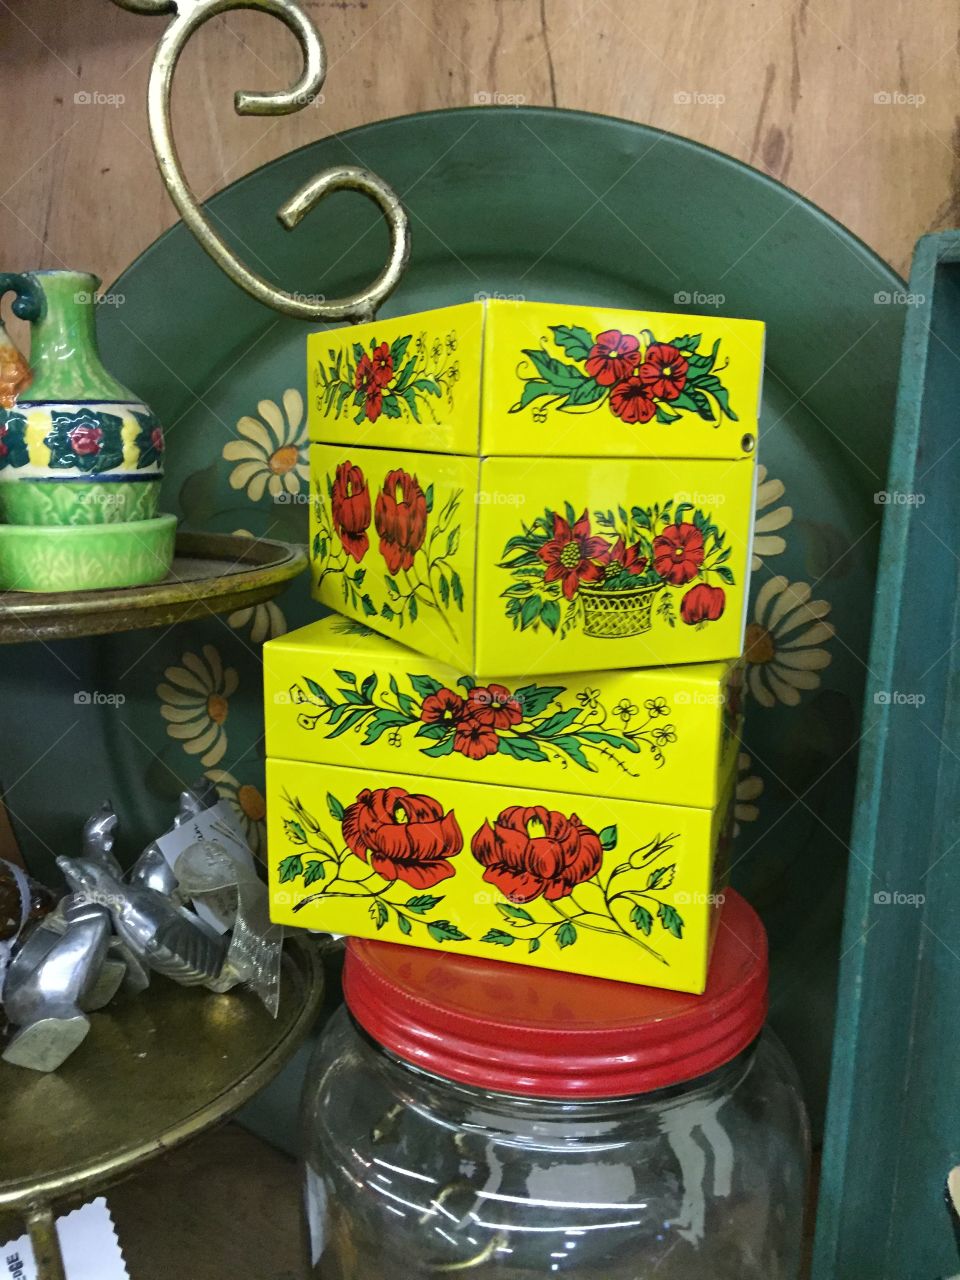 Vintage recipe boxes. Main colors r d and yellow